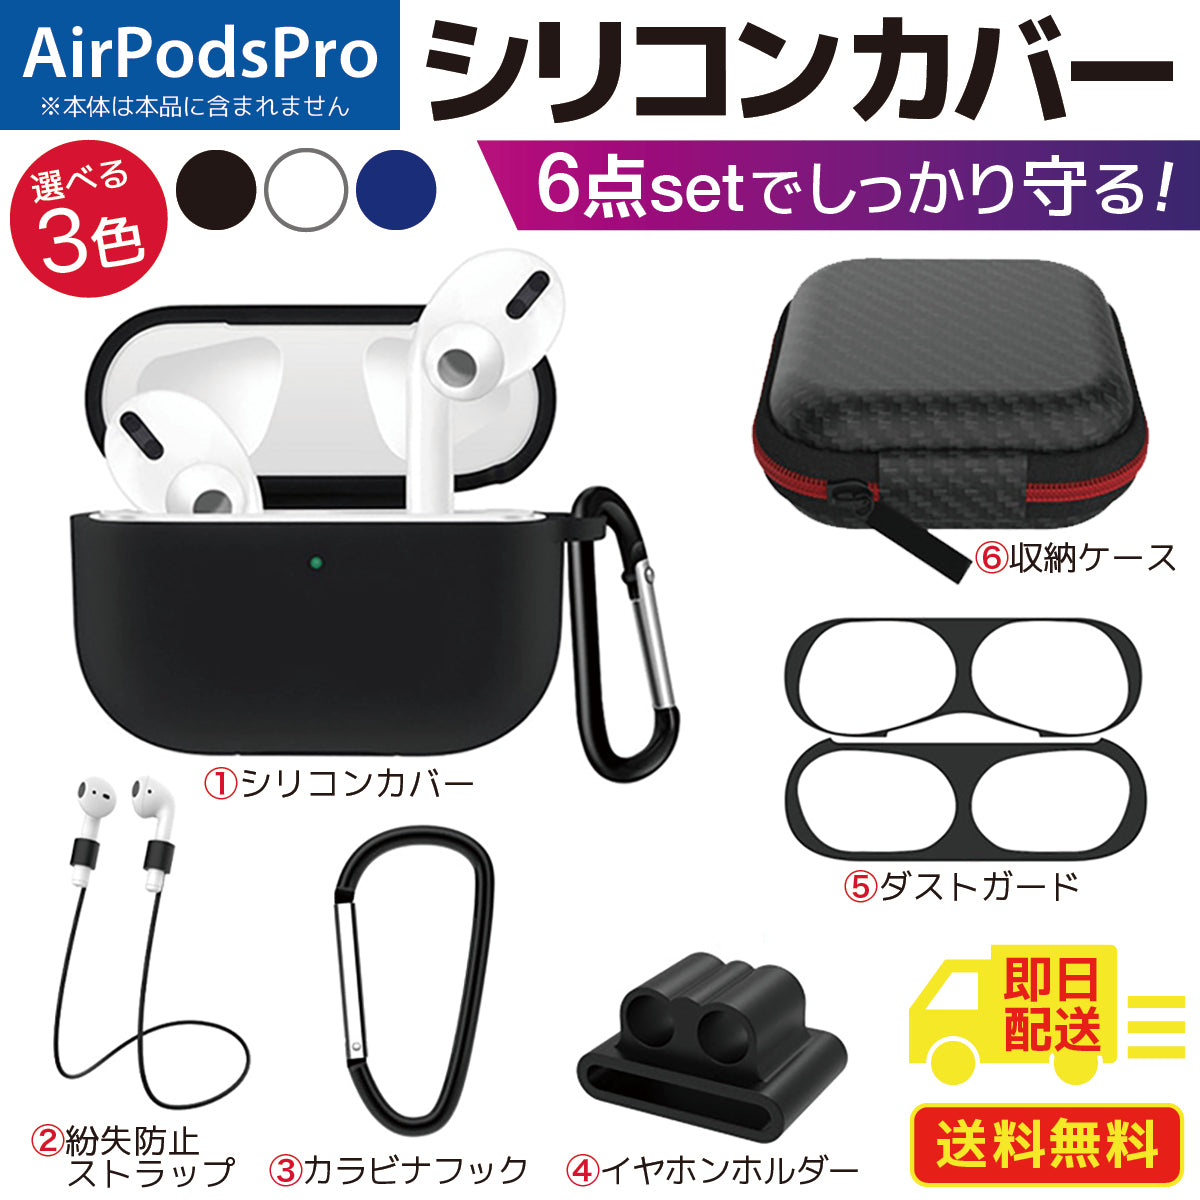 AirPods3 AirPodsPro シリコンケースセット – WorldSelect Shop